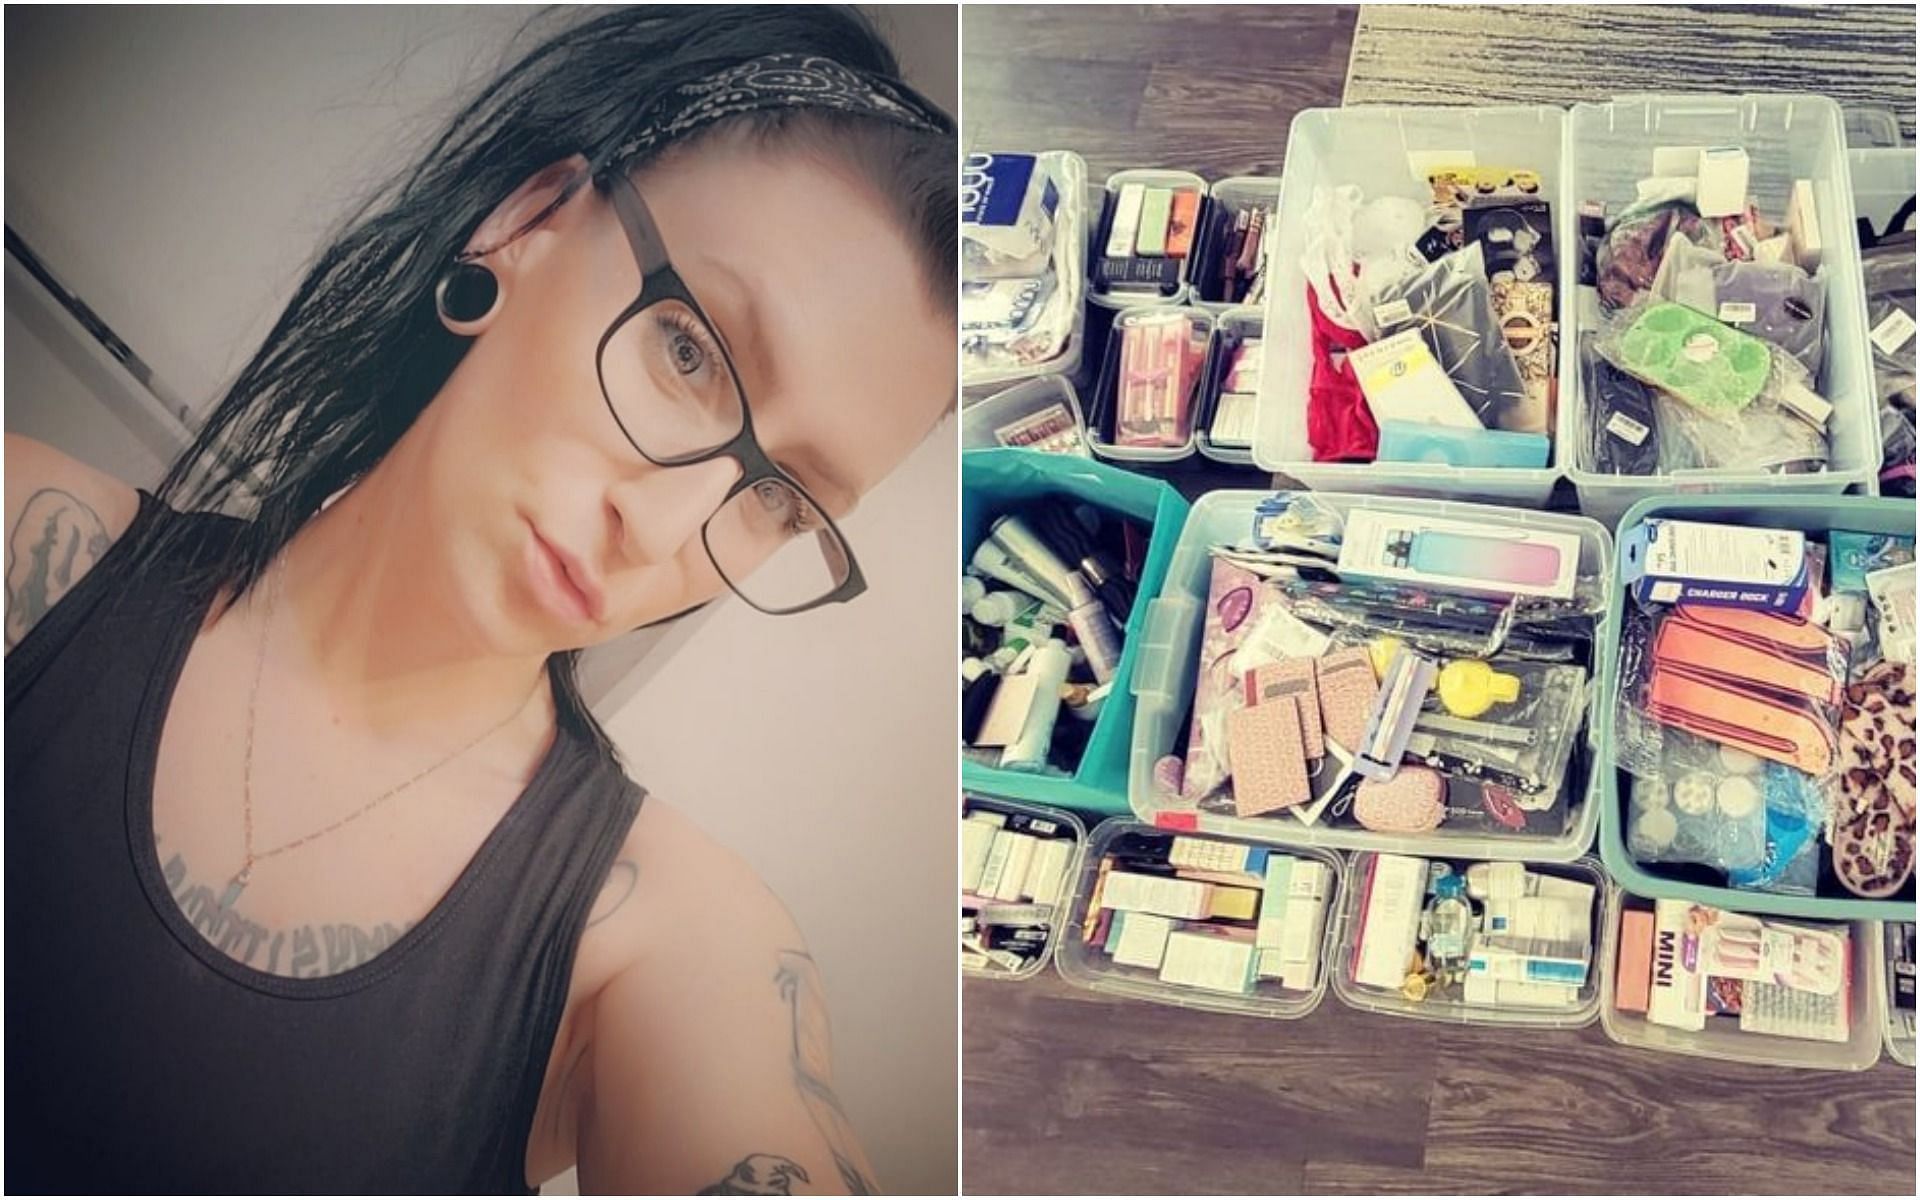 Tiffany She&#039;ree earns four figures from her dumpster diving career (Image from dumpsterdivingmama/Instagram)